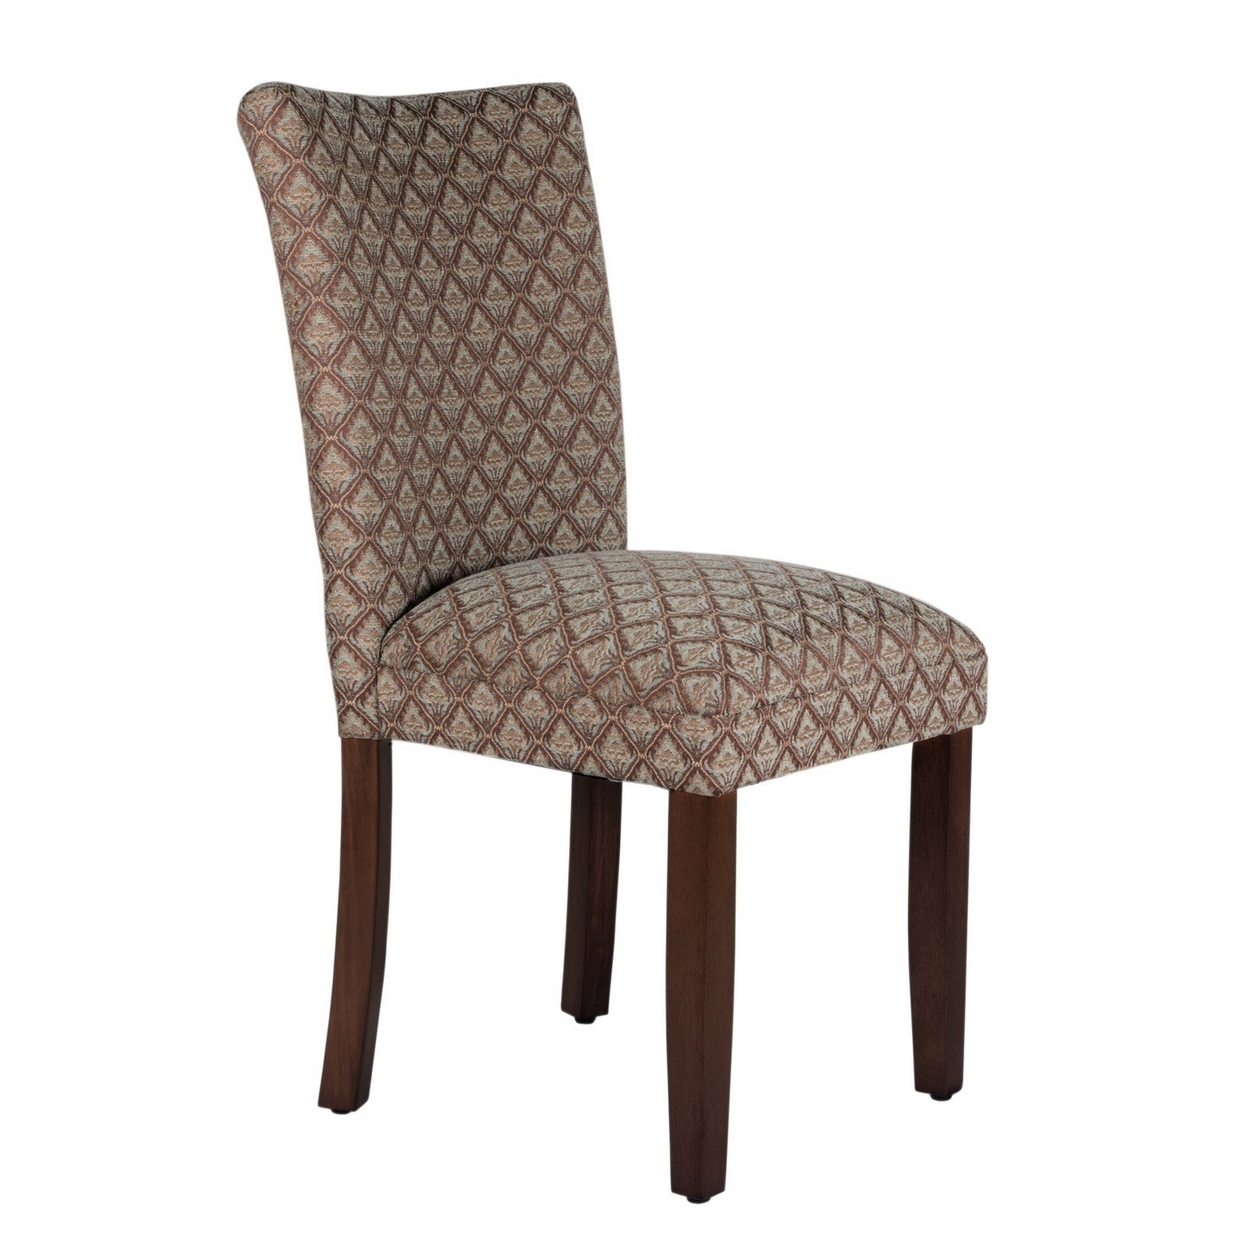 Wooden Parson Dining Chair With Damask Pattern Fabric Upholstery, Multicolor- Saltoro Sherpi